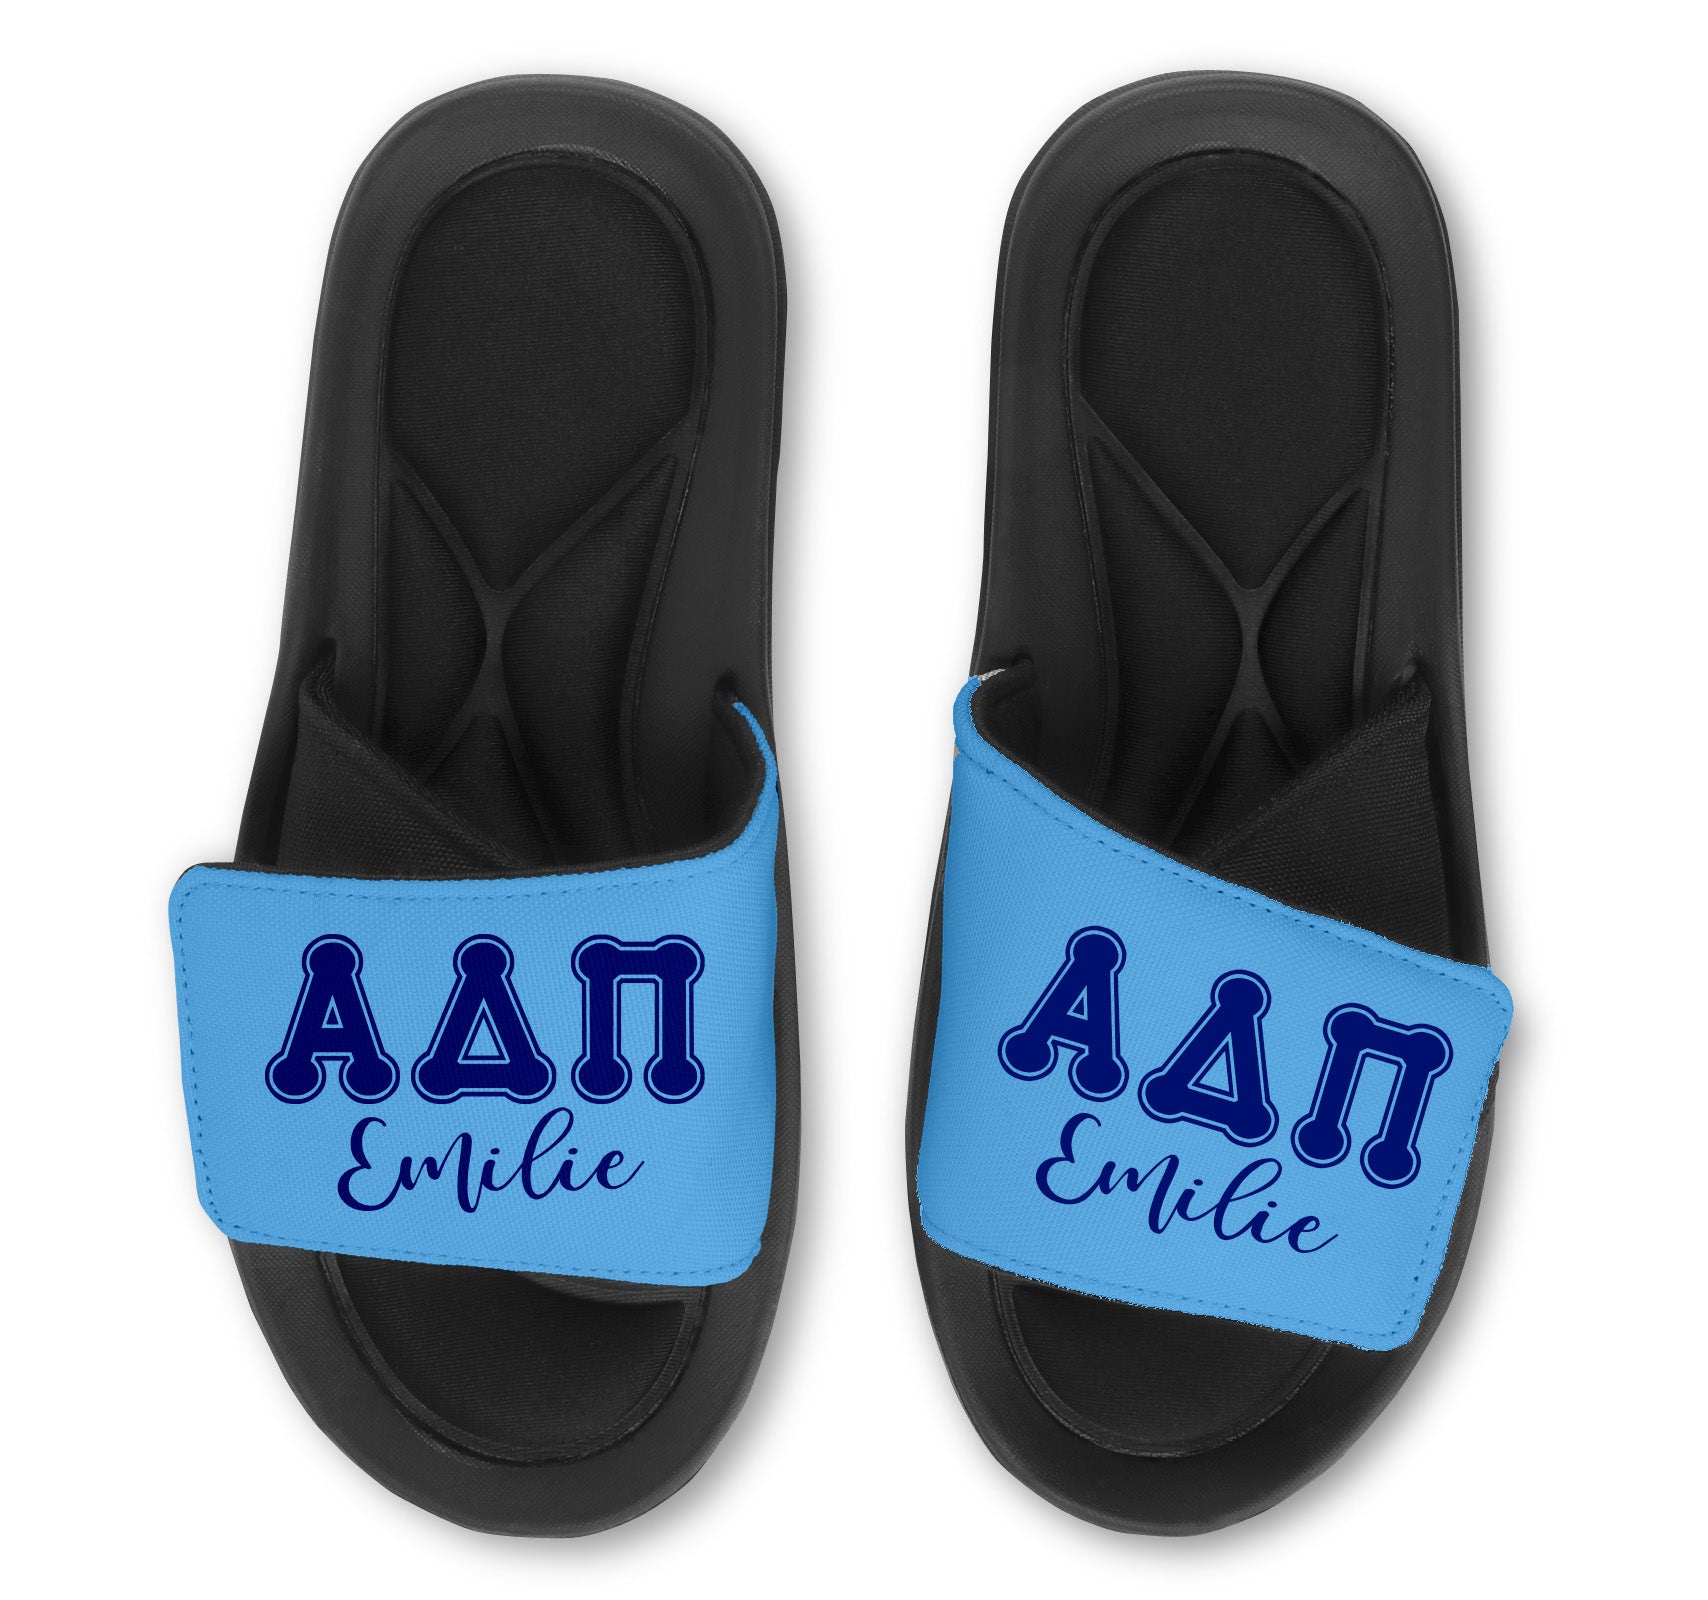 Alpha Delta Pi Slides -Customize With Your Name